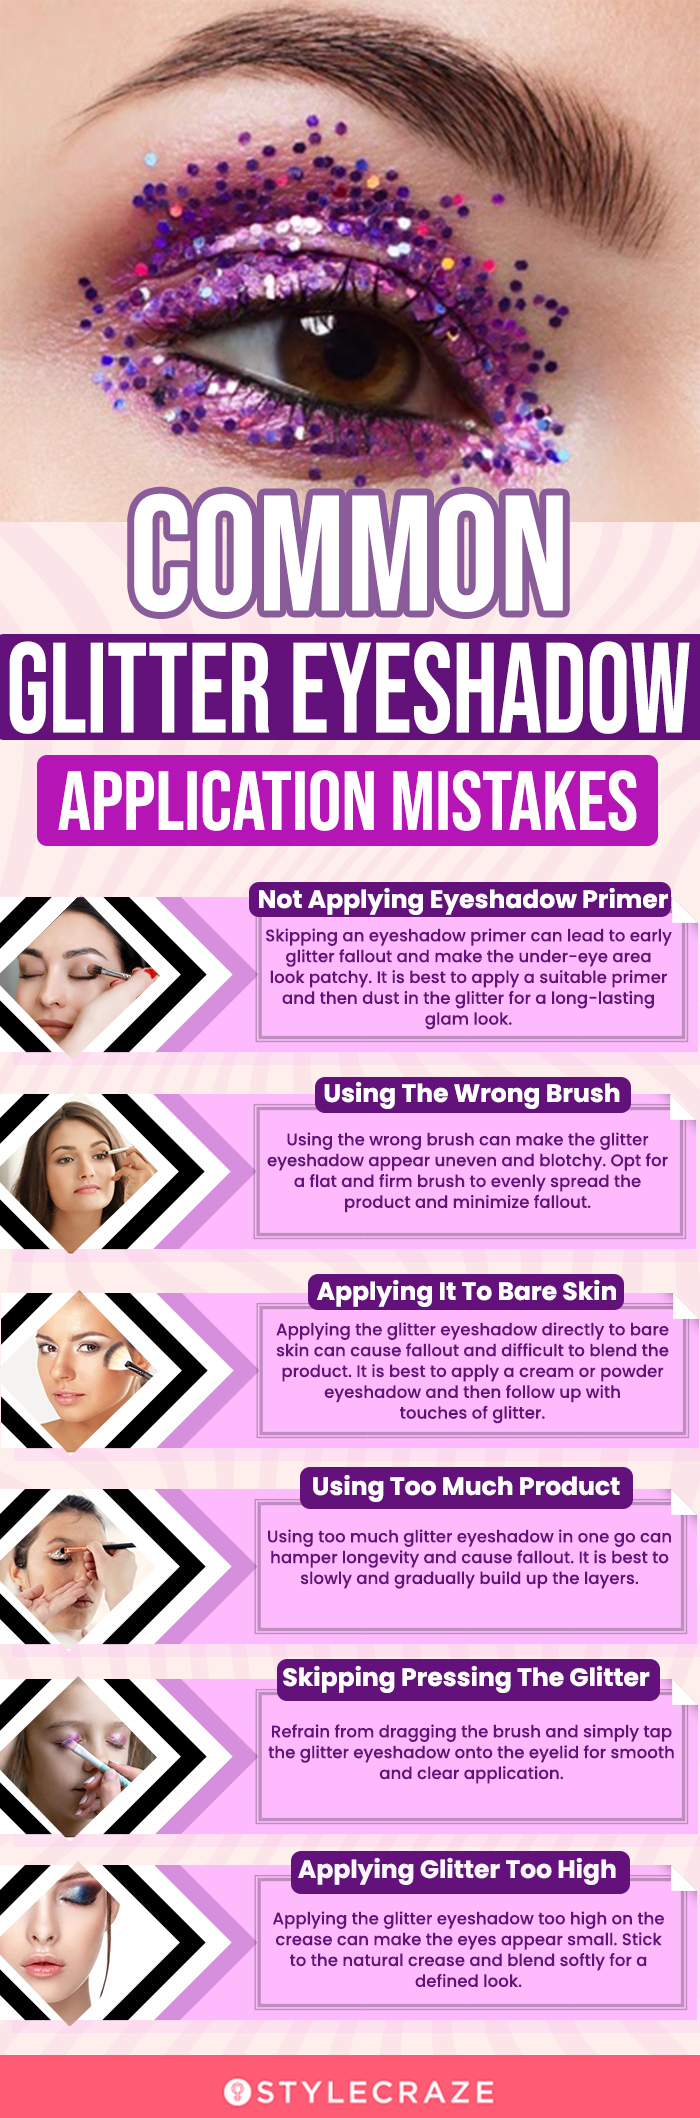 Common Glitter Eyeshadow Application Mistakes(infographic)